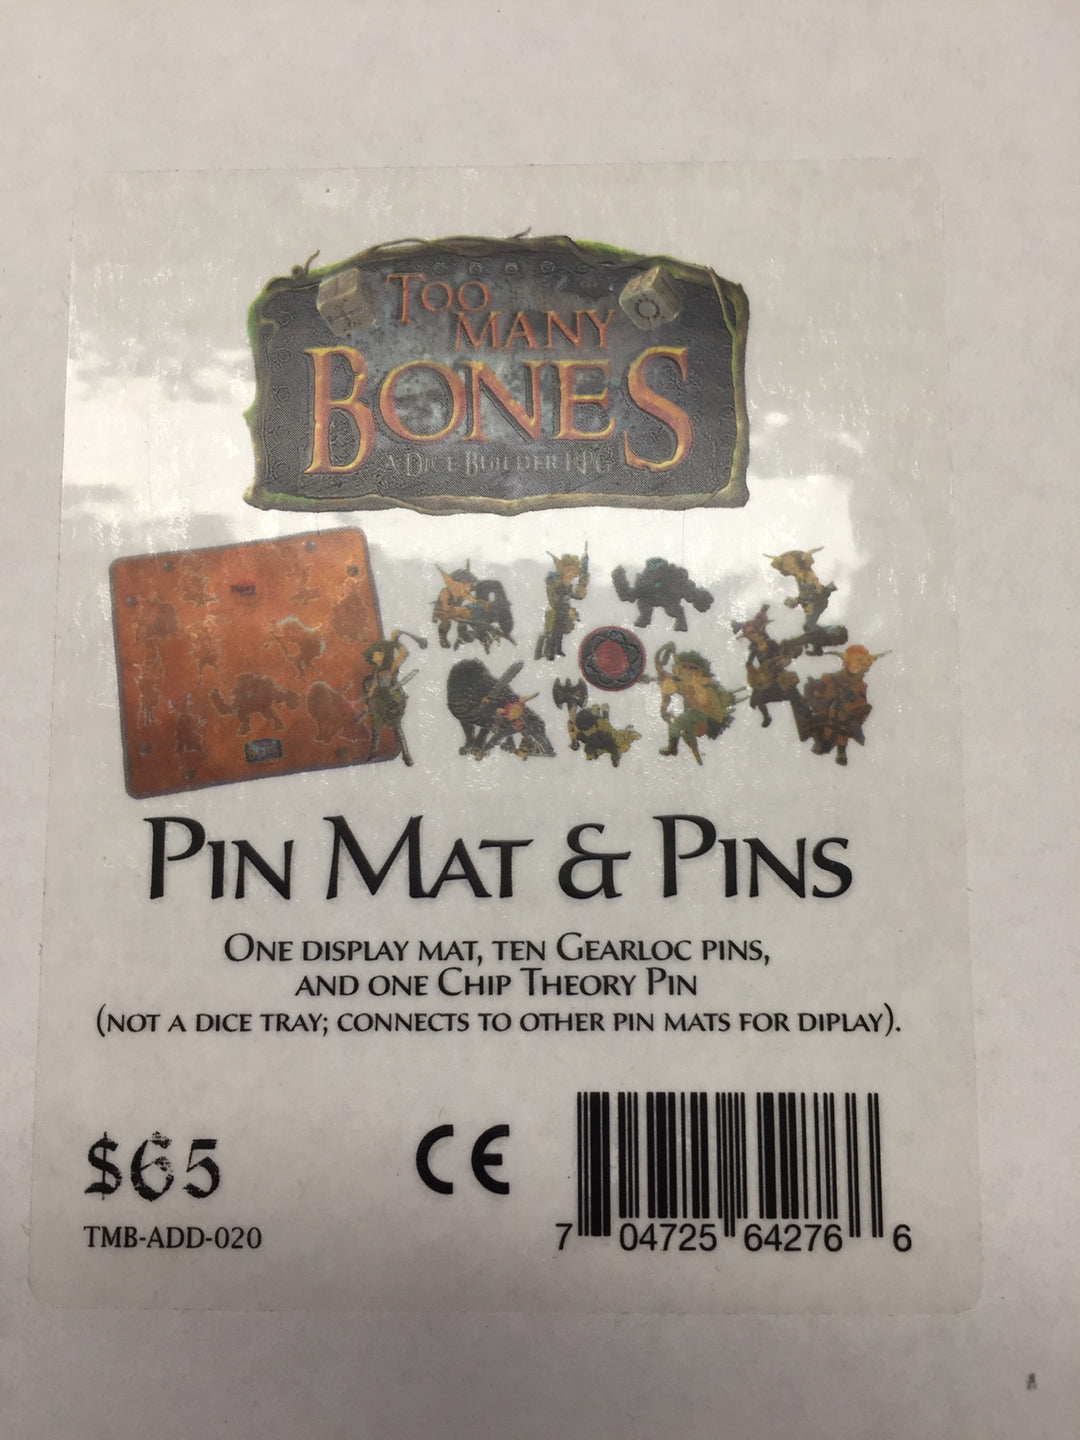 Meeple Enamel Pins | 7 Pin Set | Lapel Pins for Board Game Players